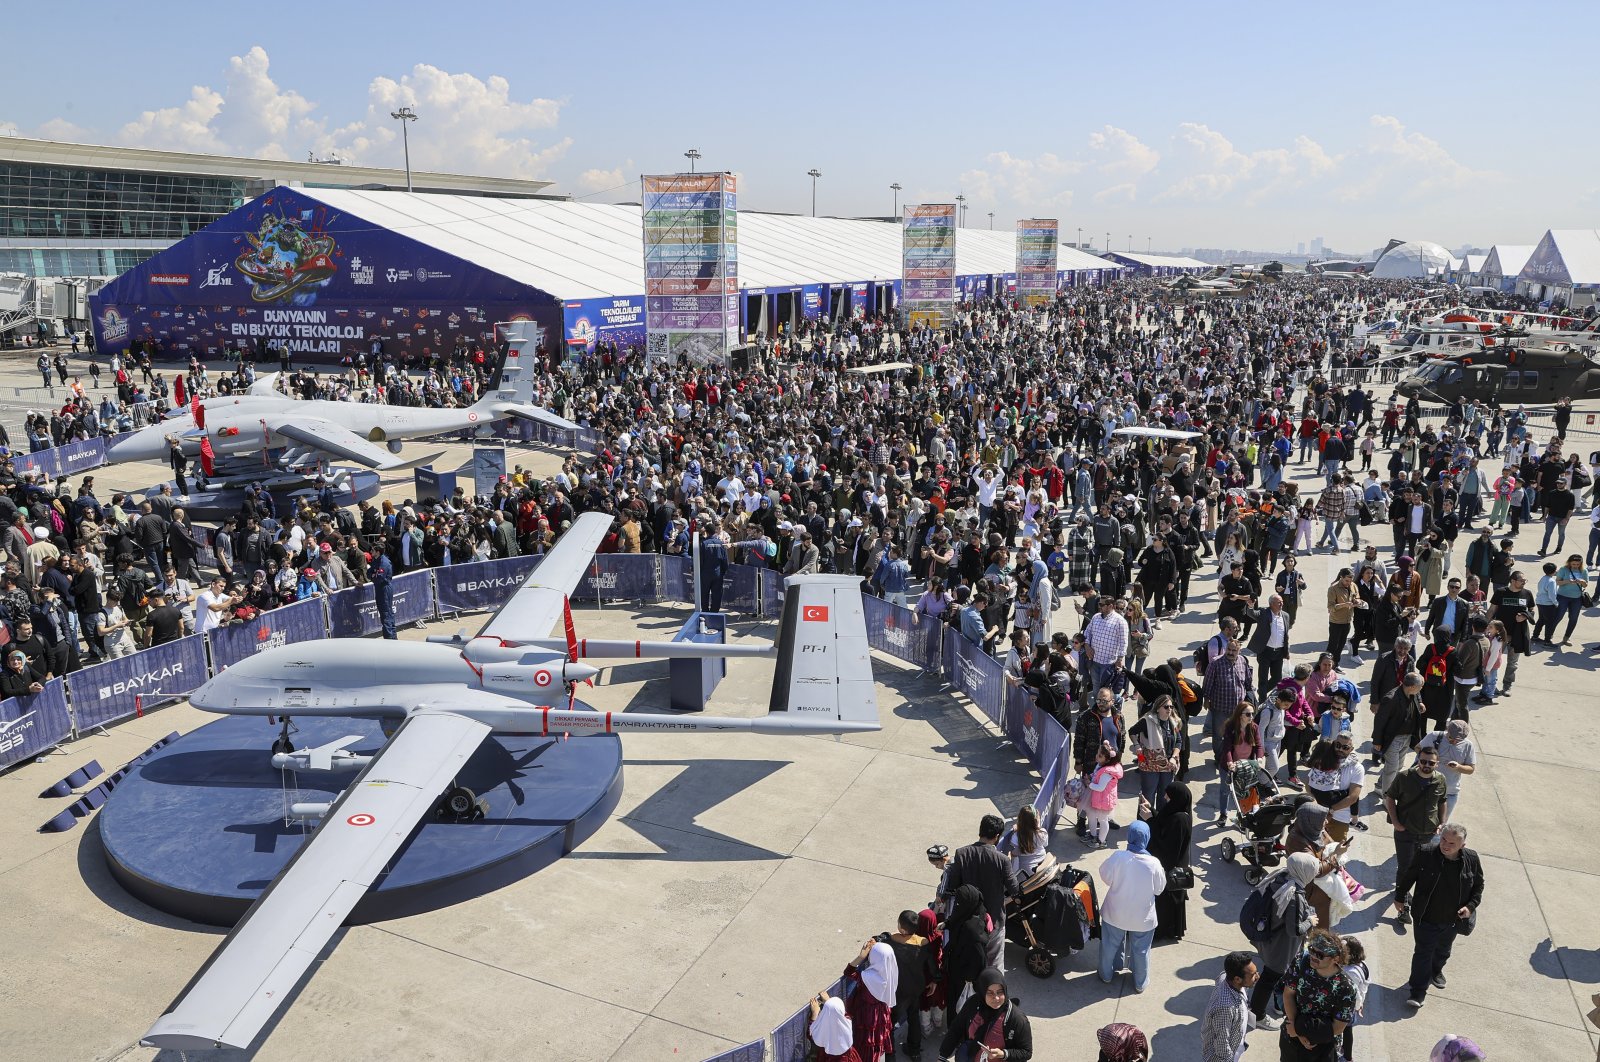 People are seen at the now-closed Atatürk Airport as part of Teknofest, Türkiye’s premier aerospace and technology festival, in Istanbul, Türkiye, May 1, 2023. (AA Photo)